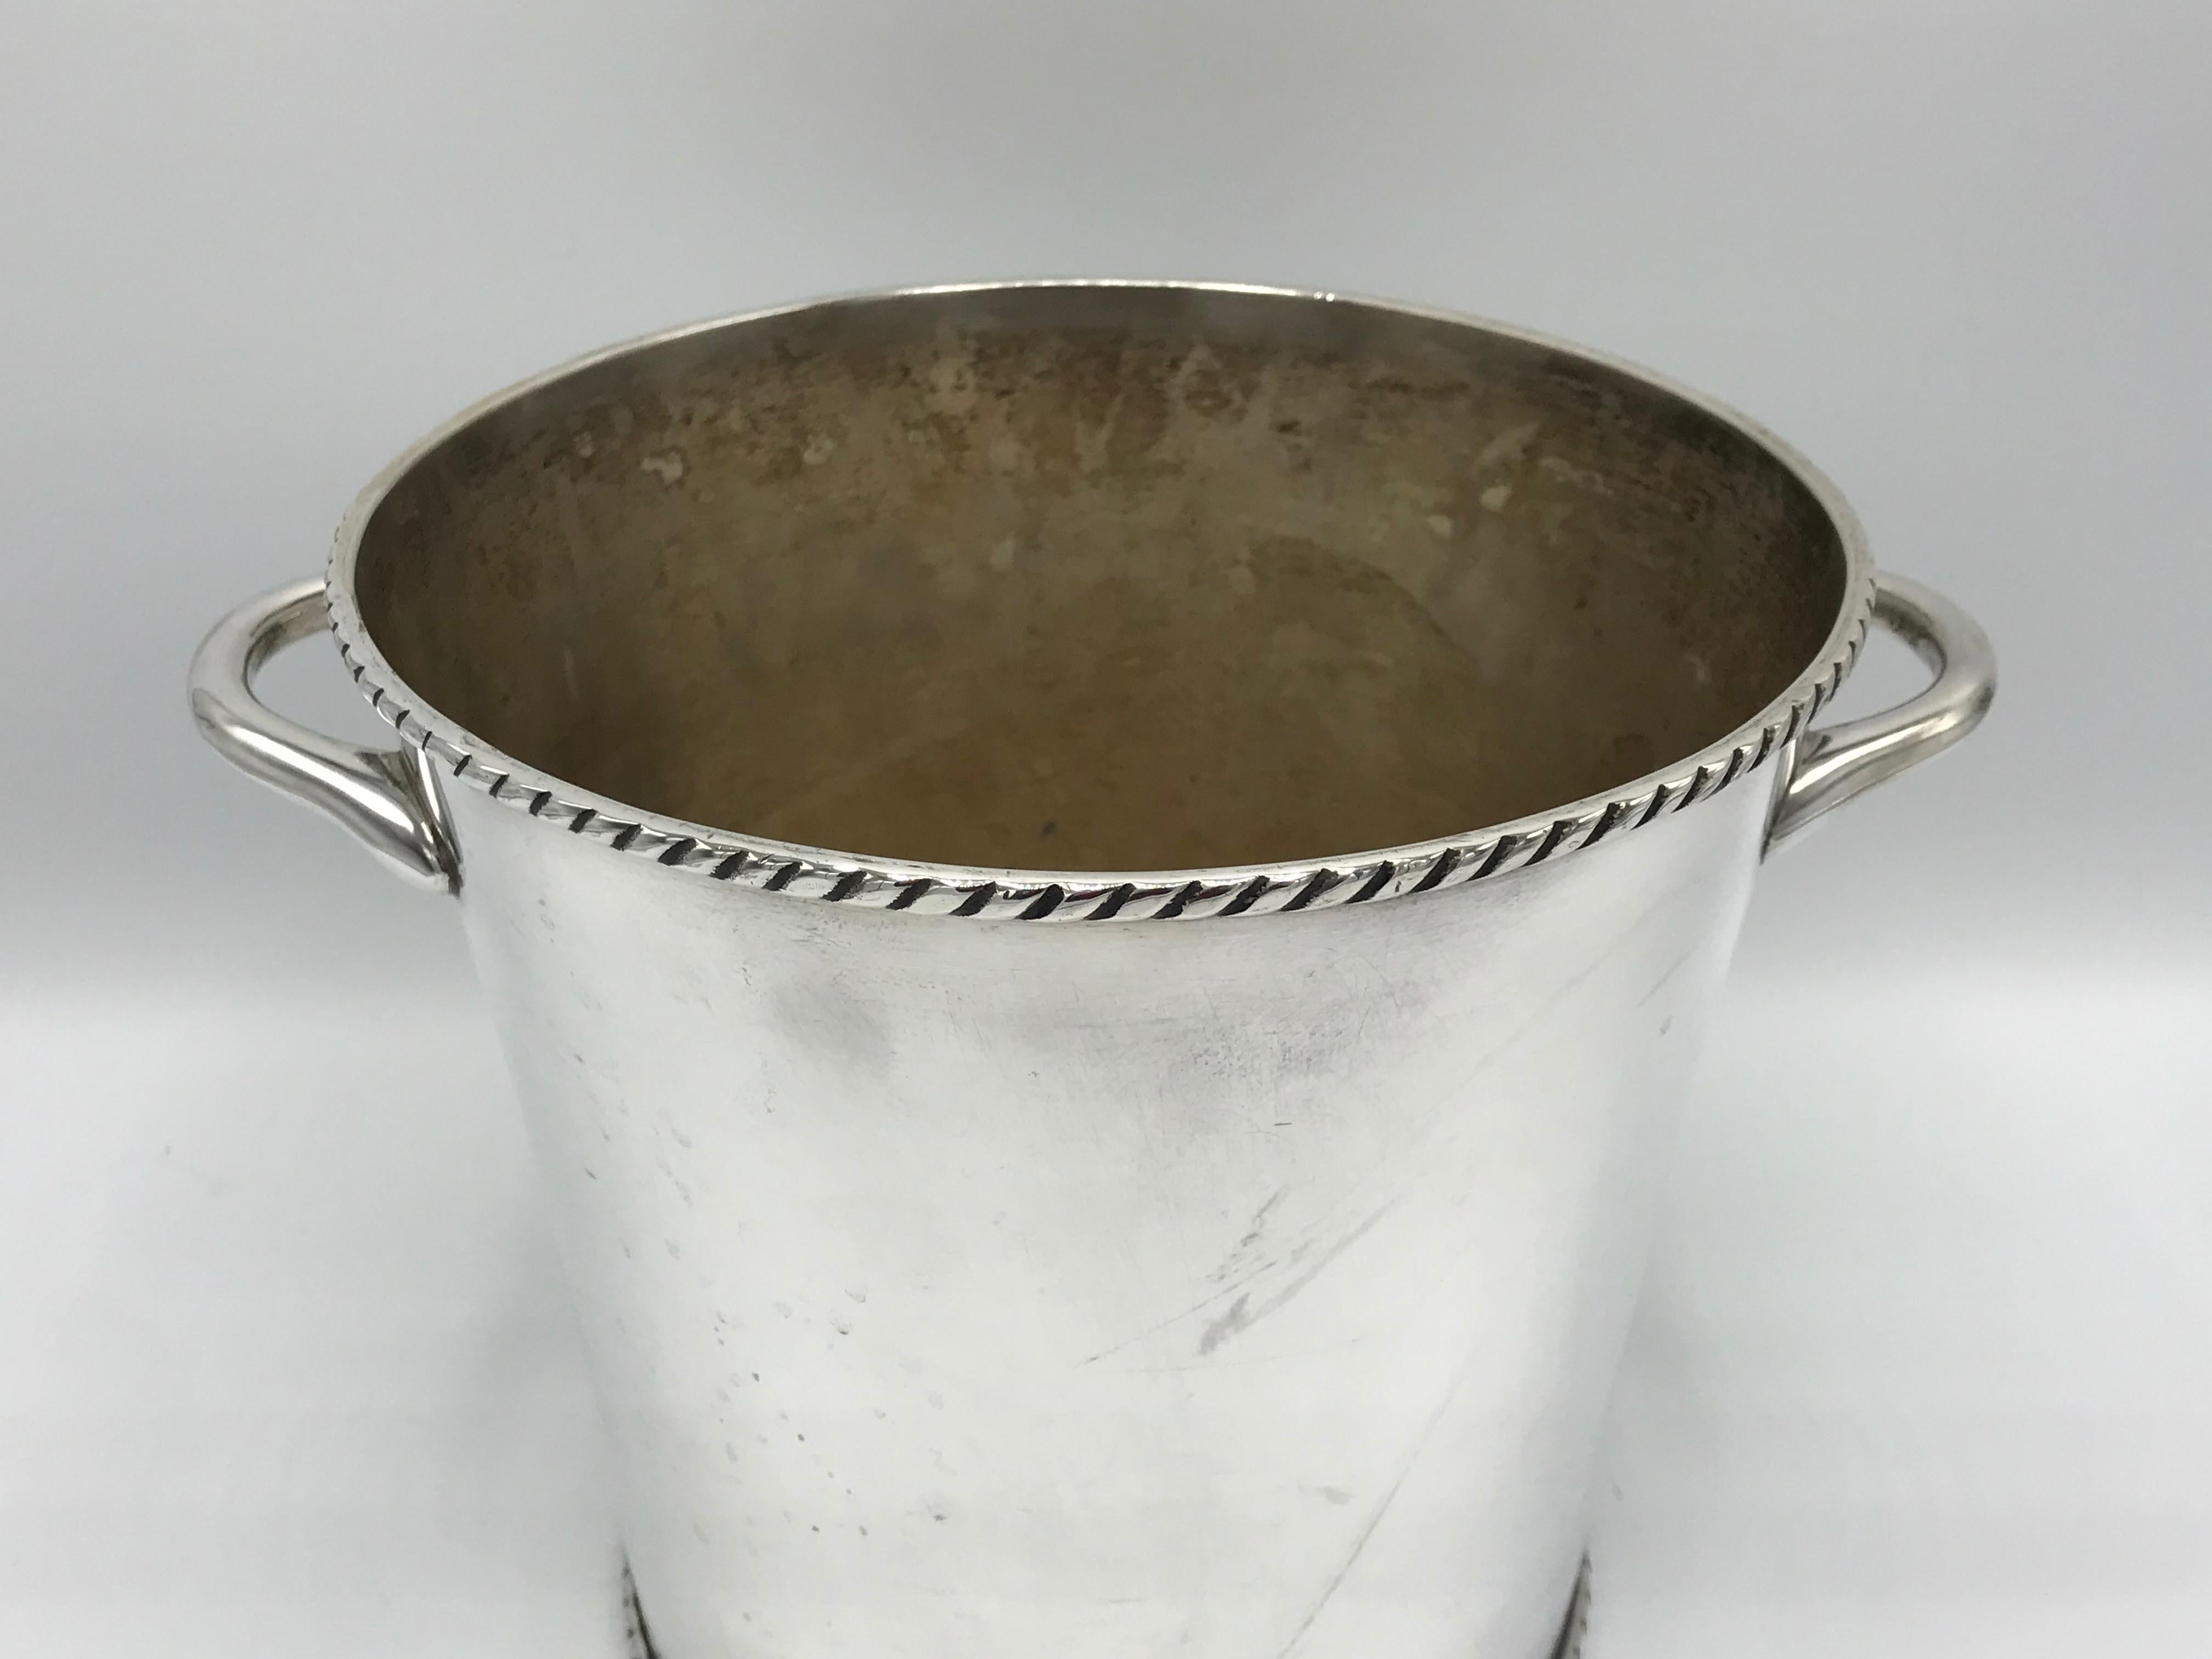 Offered is a stunning, 1970s polished silver plate champagne bucket. The piece has a lovely rope motif along the base and opening. Heavy, weighing nearly 3lbs.